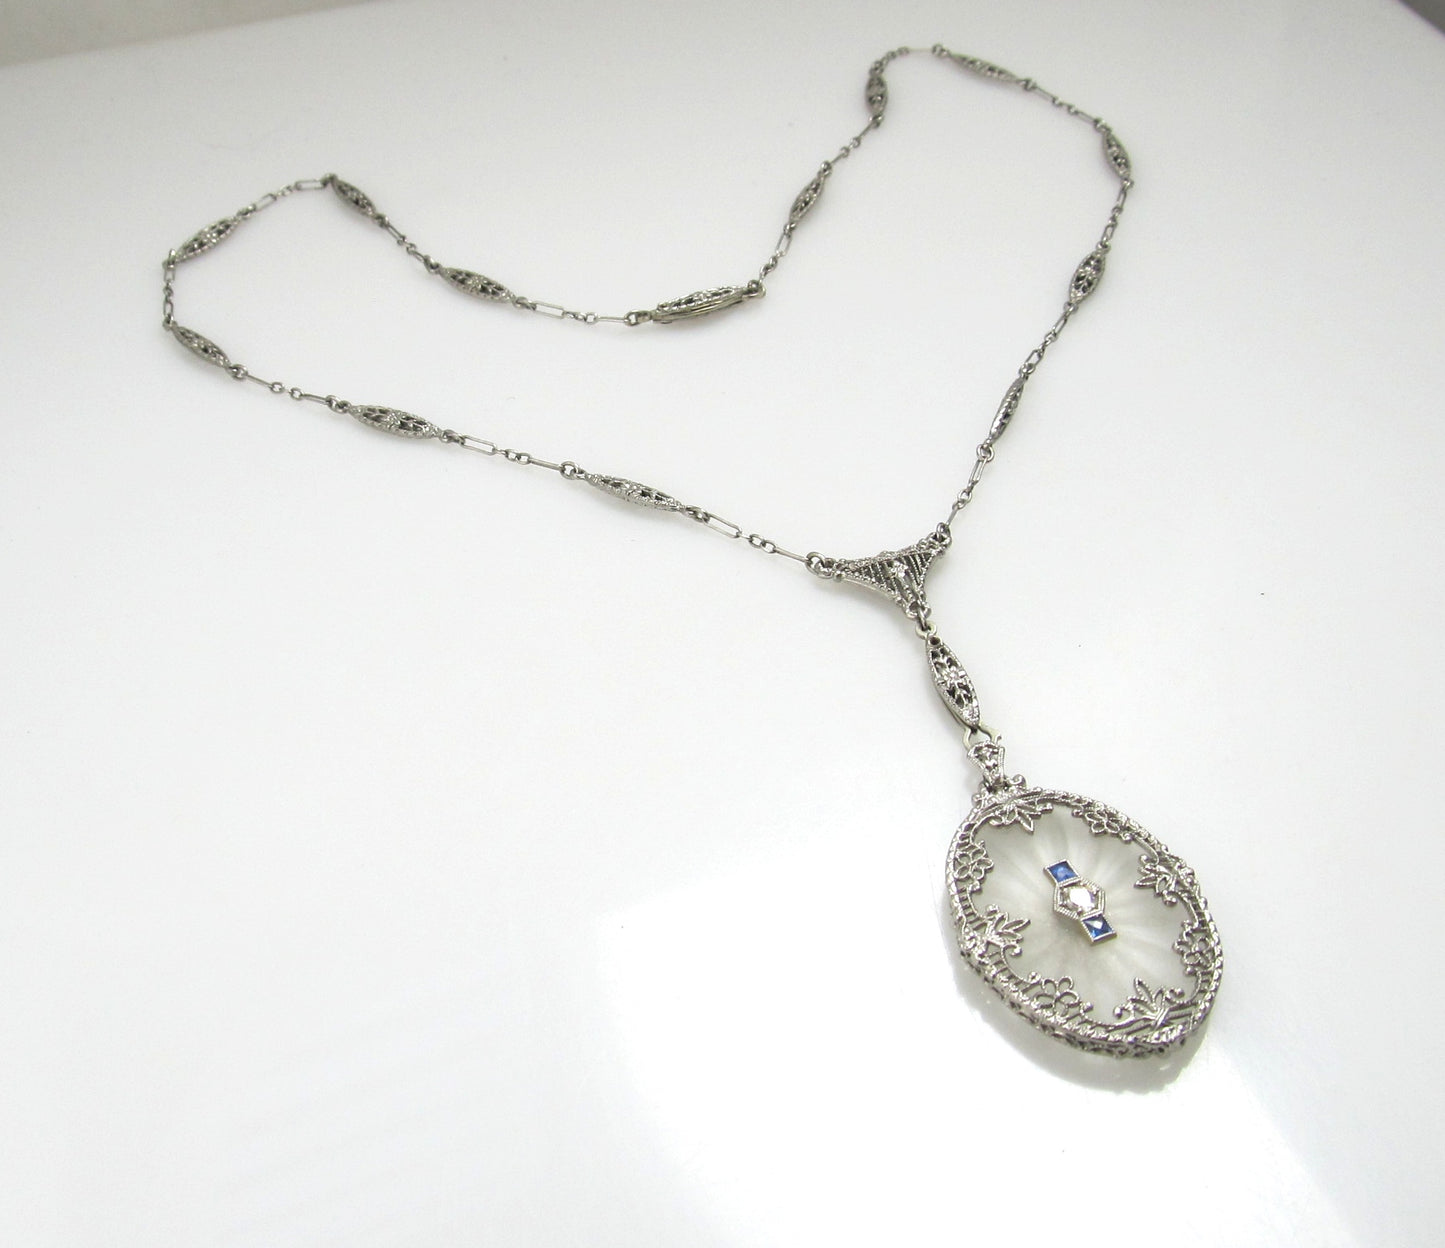 14k White Gold Filigree Necklace With A Diamond, Sapphires And Camphor Glass, Circa 1920